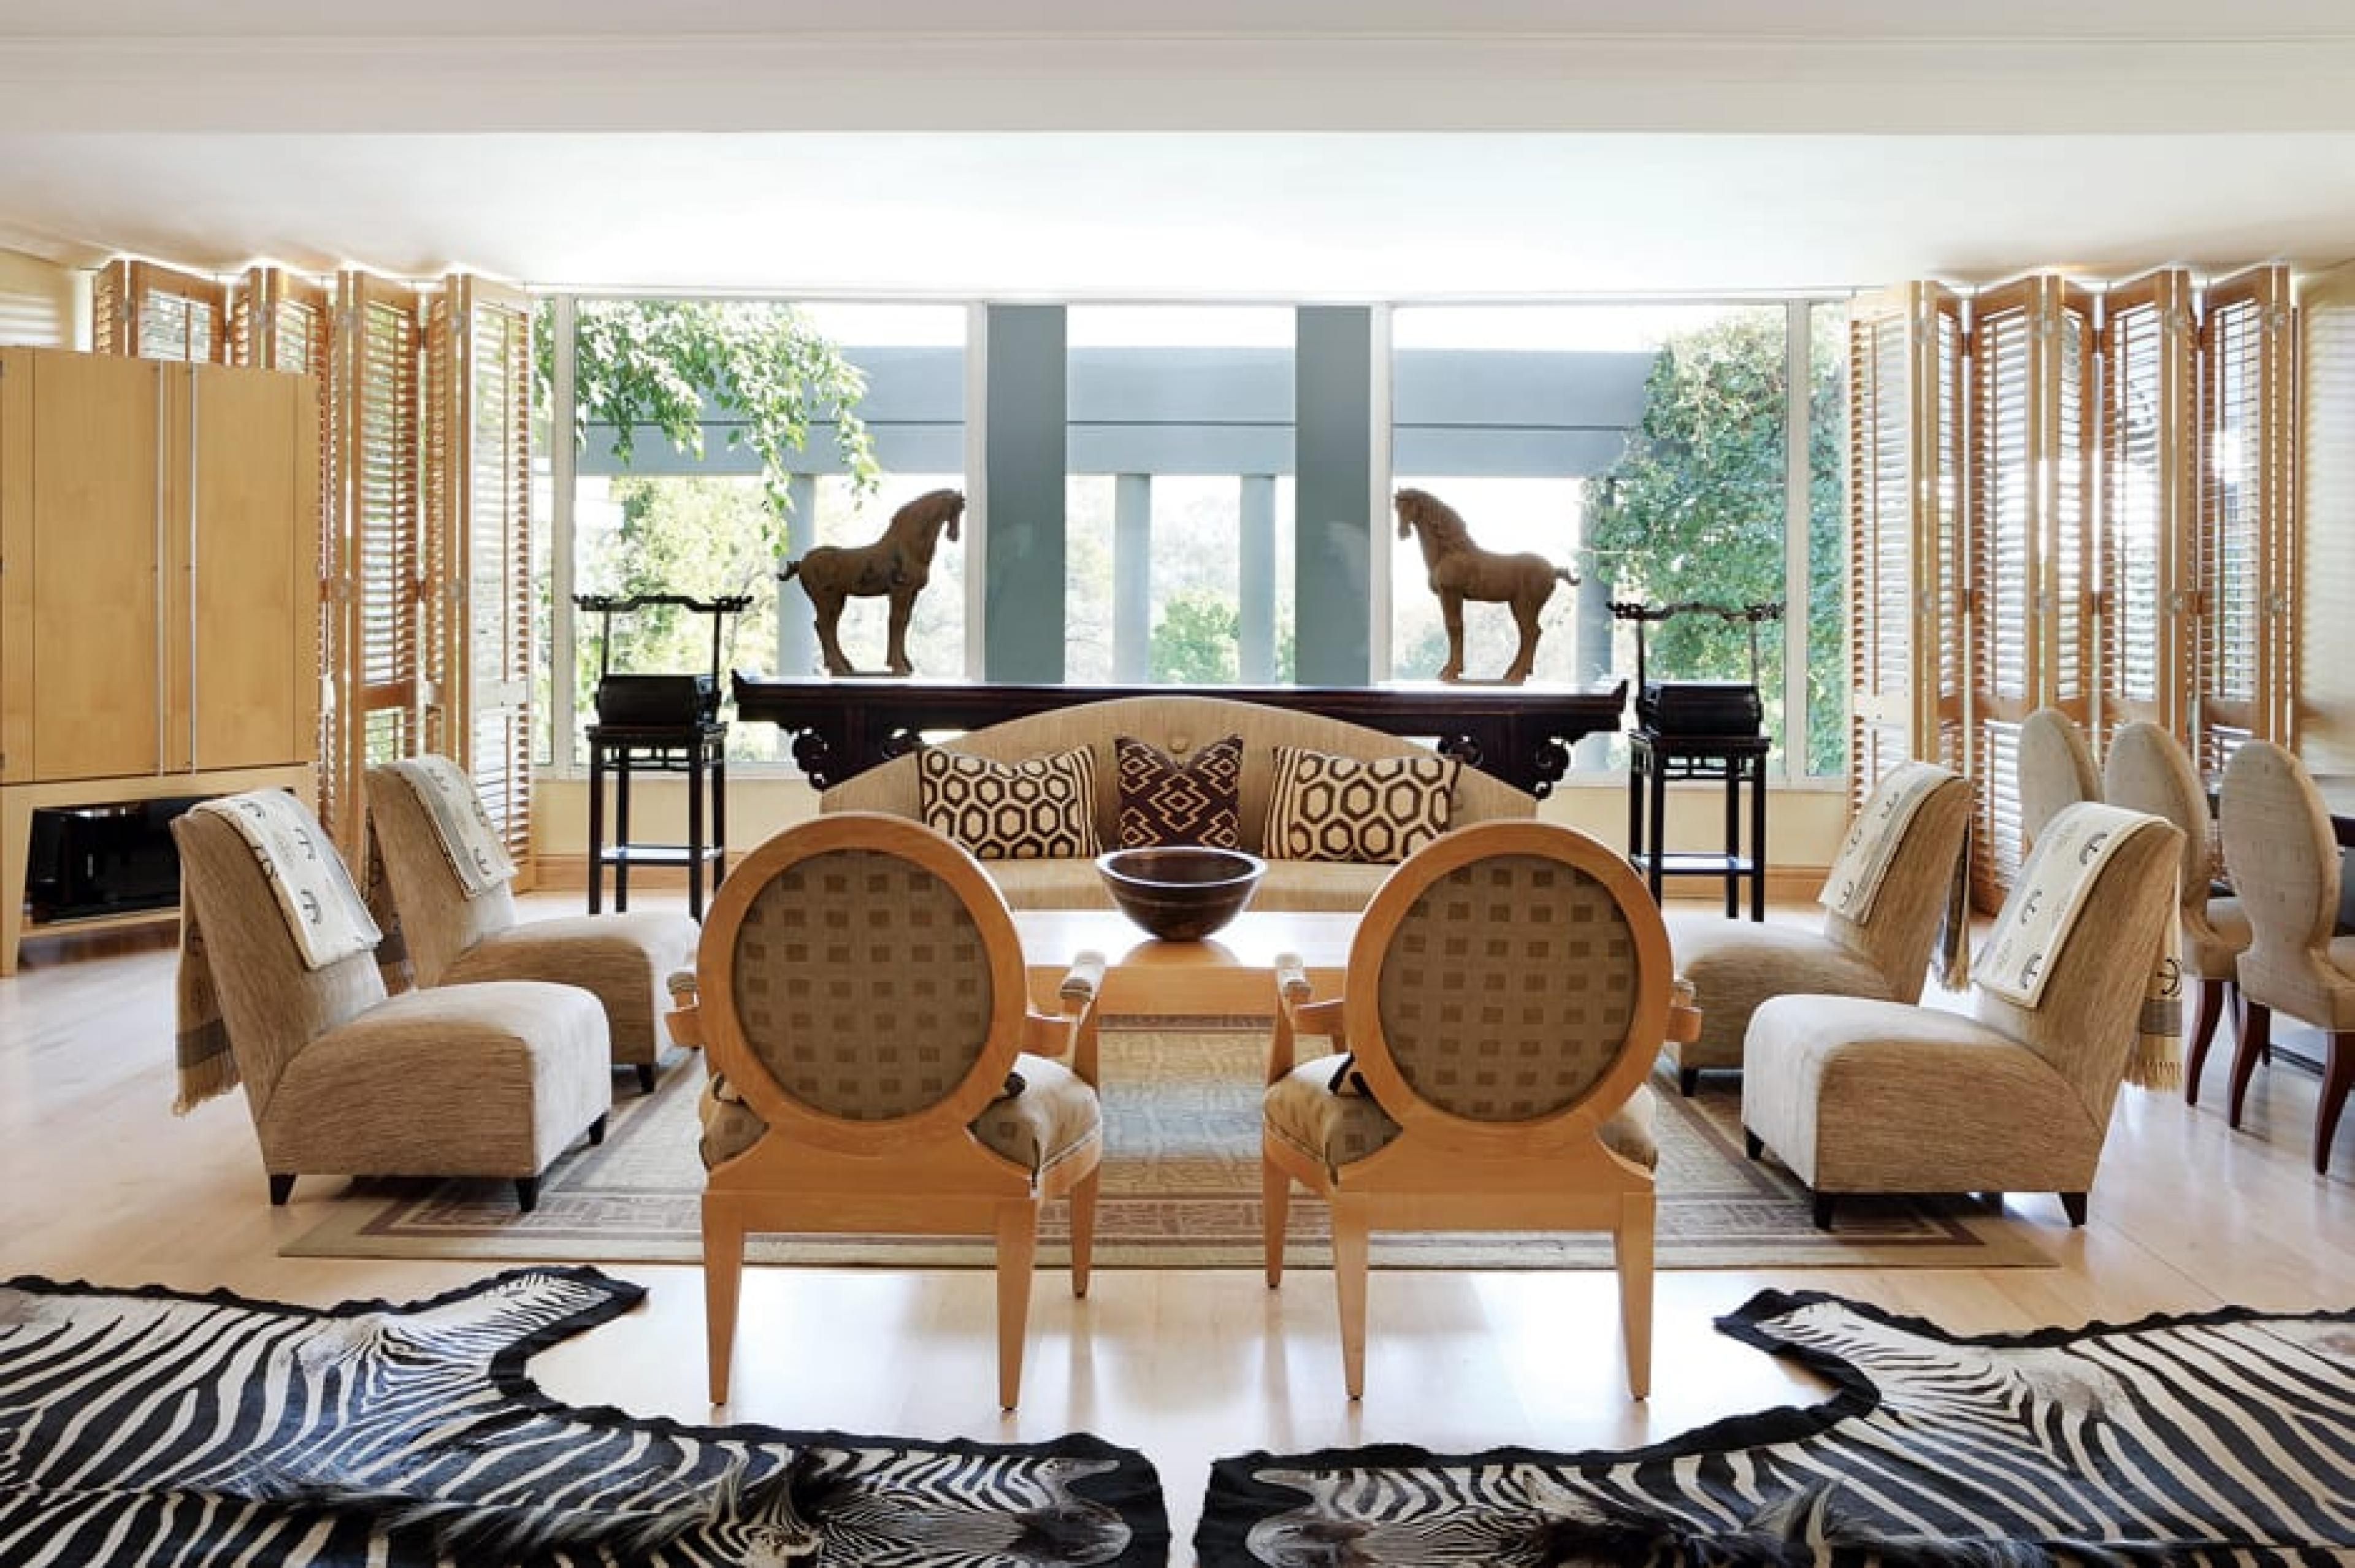 Presidential Suite at The Saxon Hotel, Villas & Spa, Johannesburg, South Africa